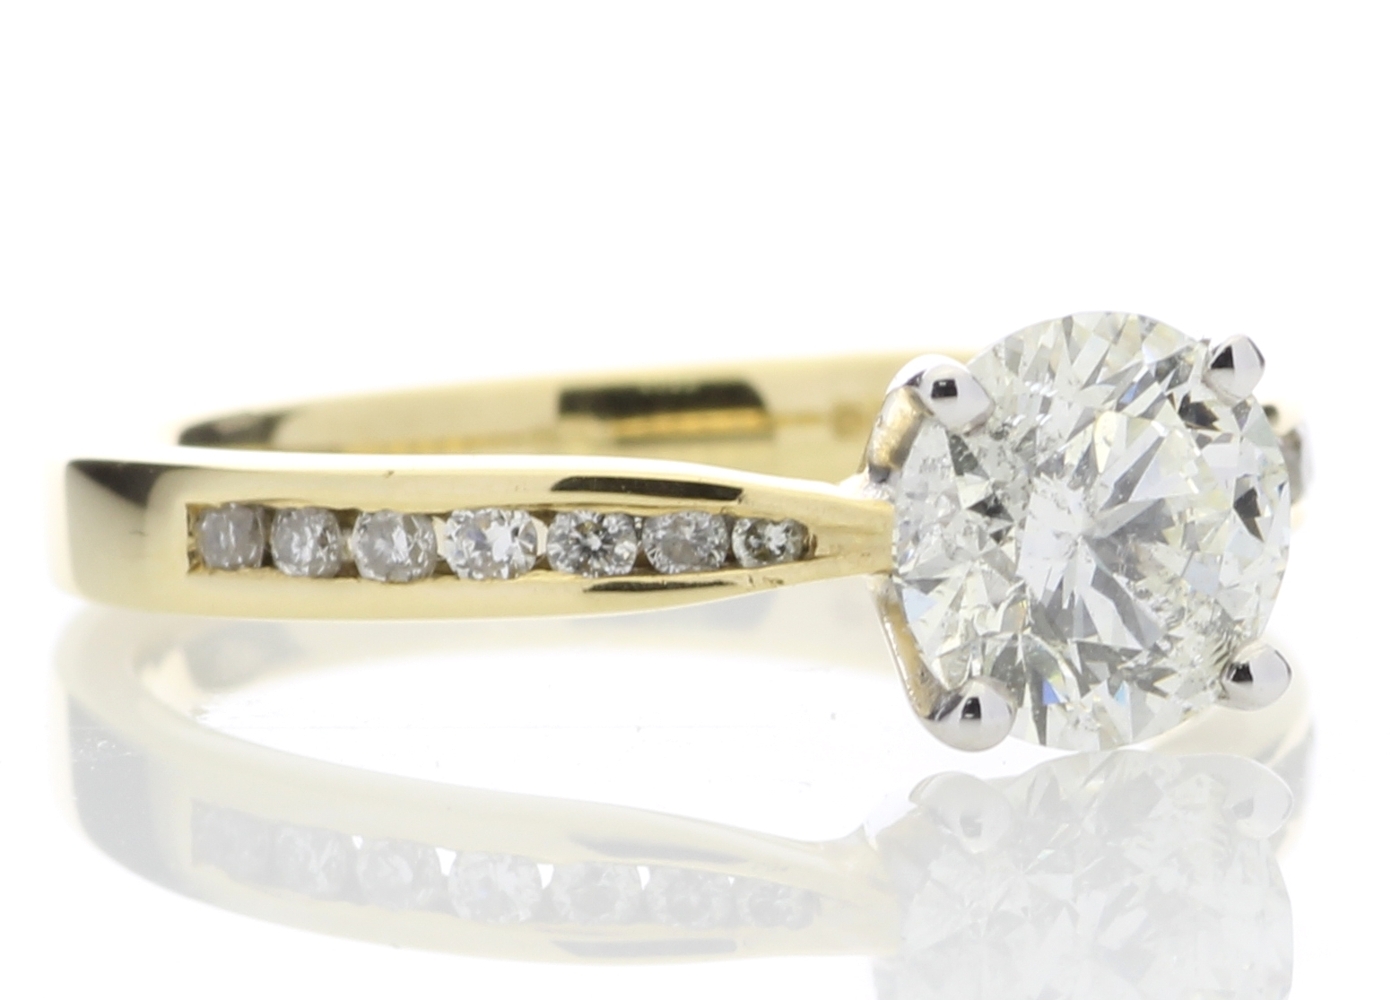 18ct Yellow Gold Diamond Ring With Stone Set Shoulders 1.28 Carats - Valued By IDI £21,775.00 - - Image 4 of 5